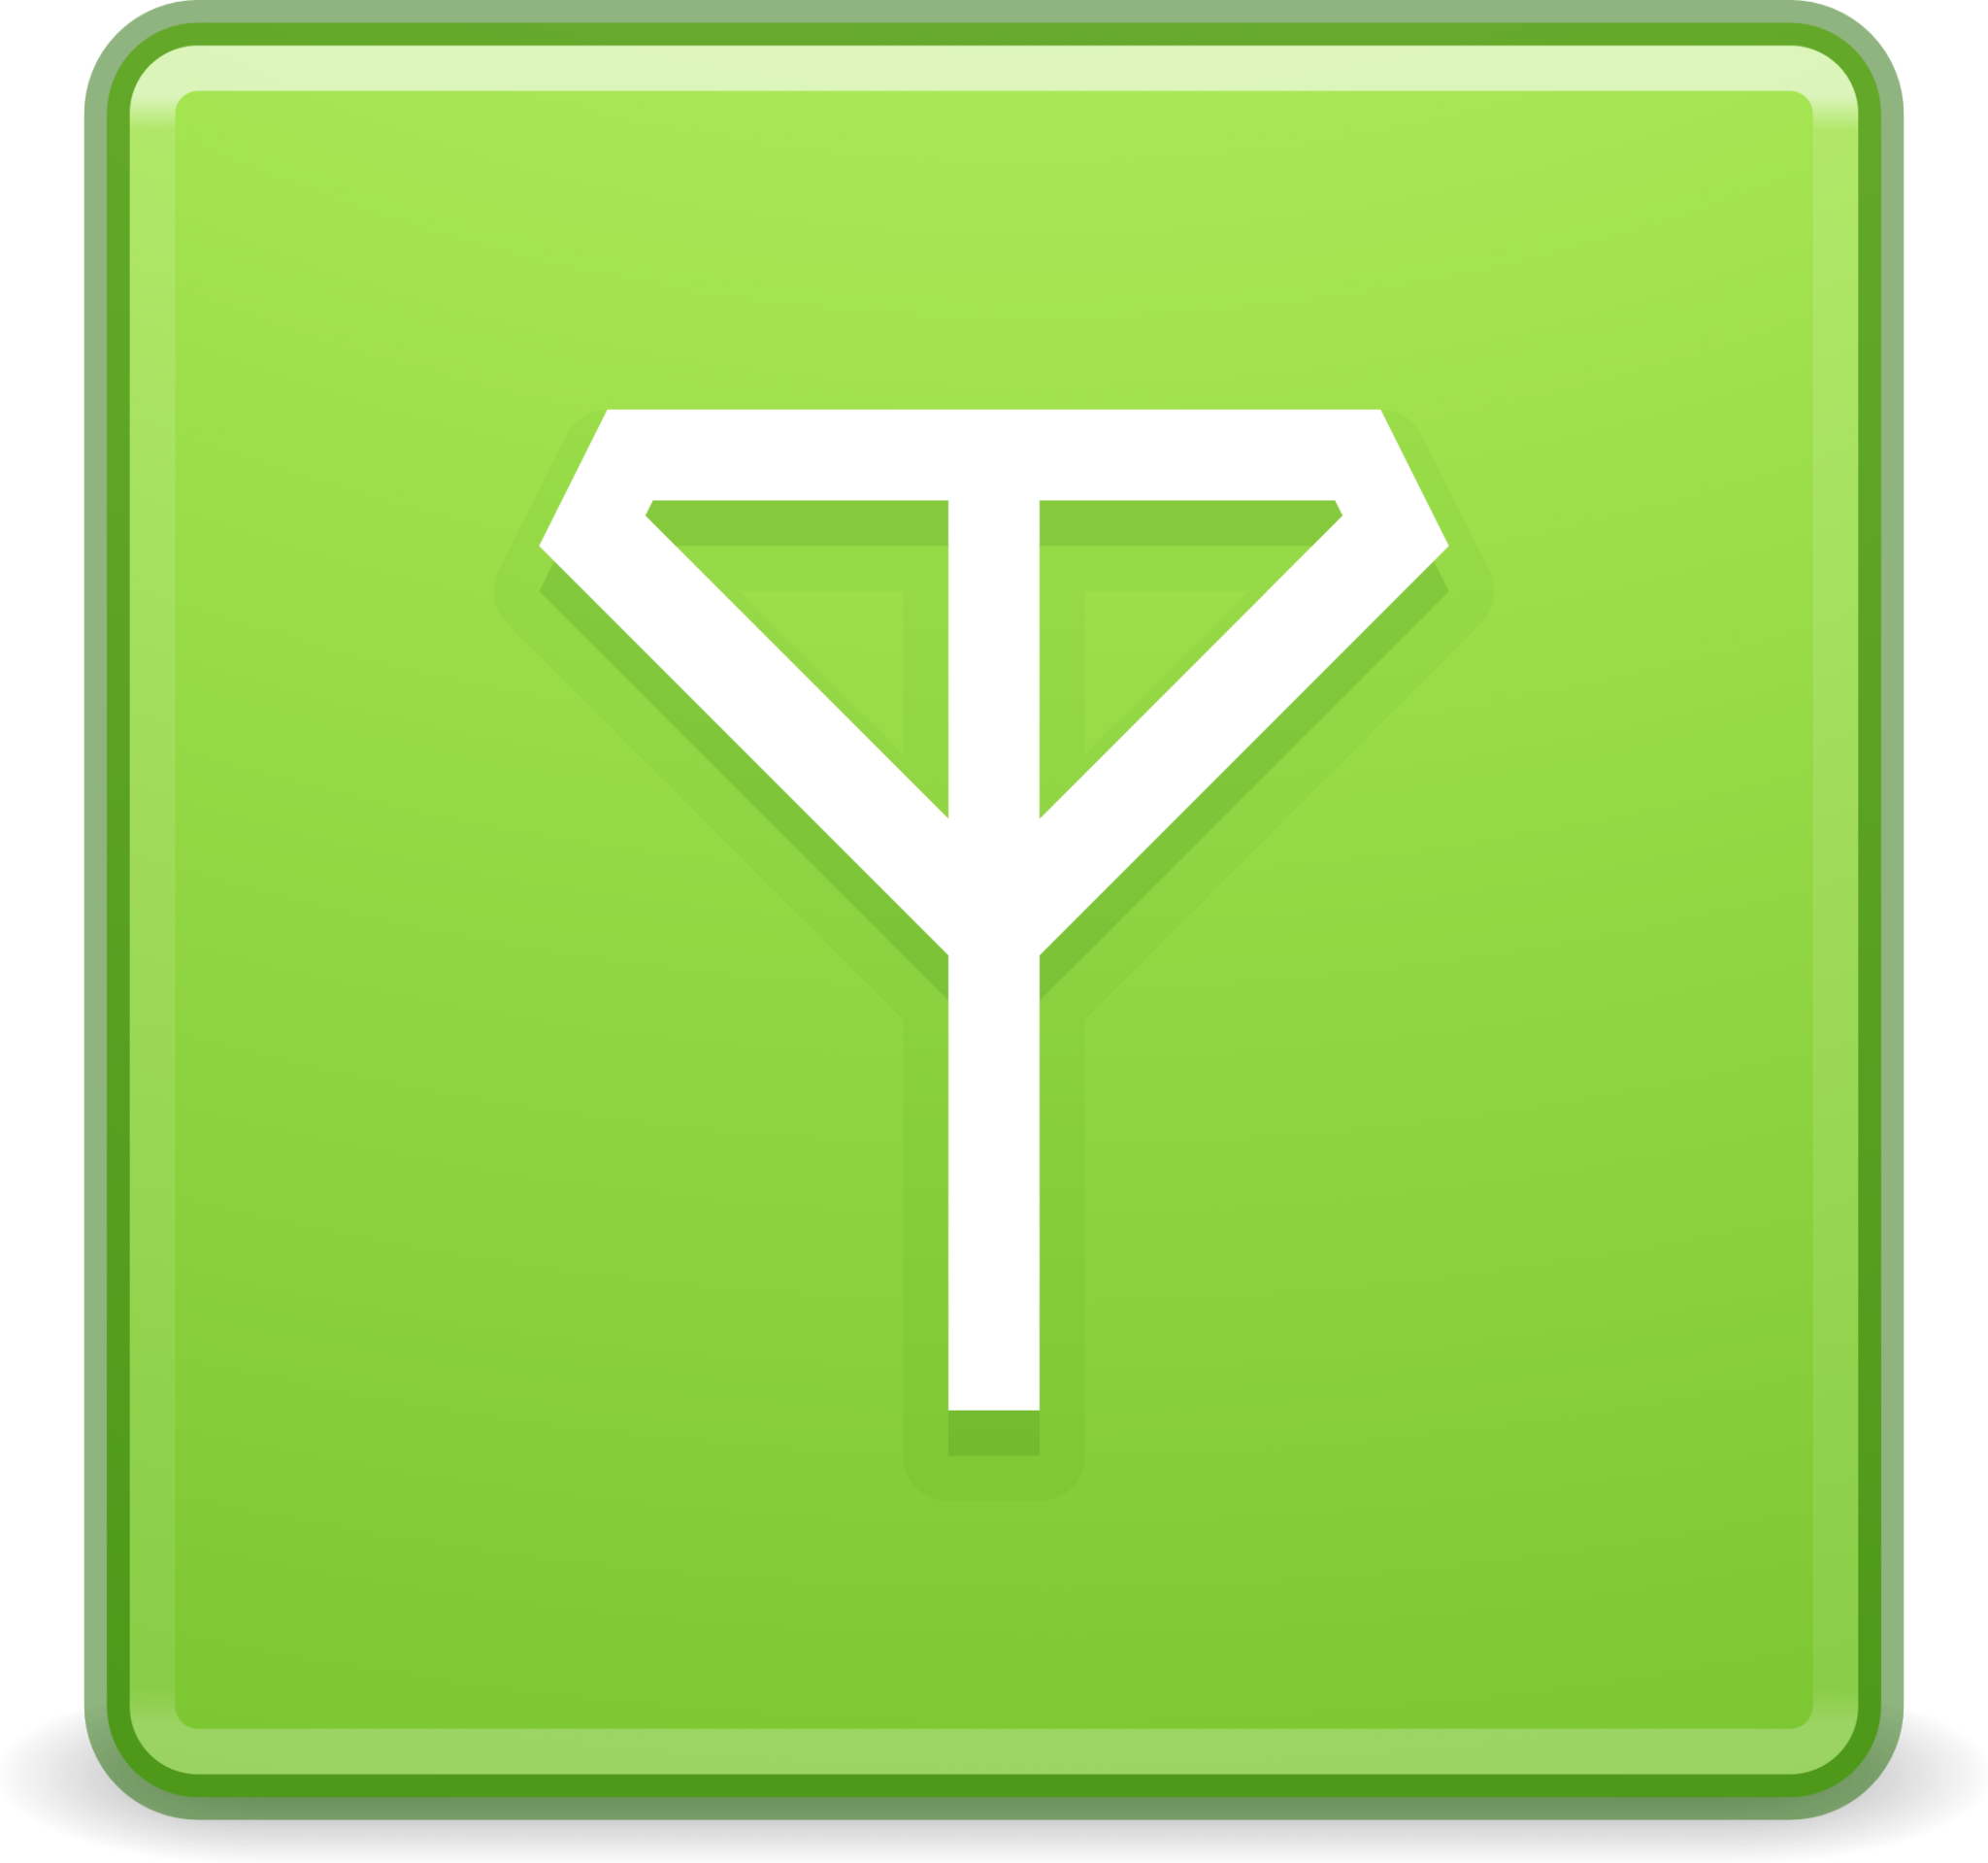 network cellular icon